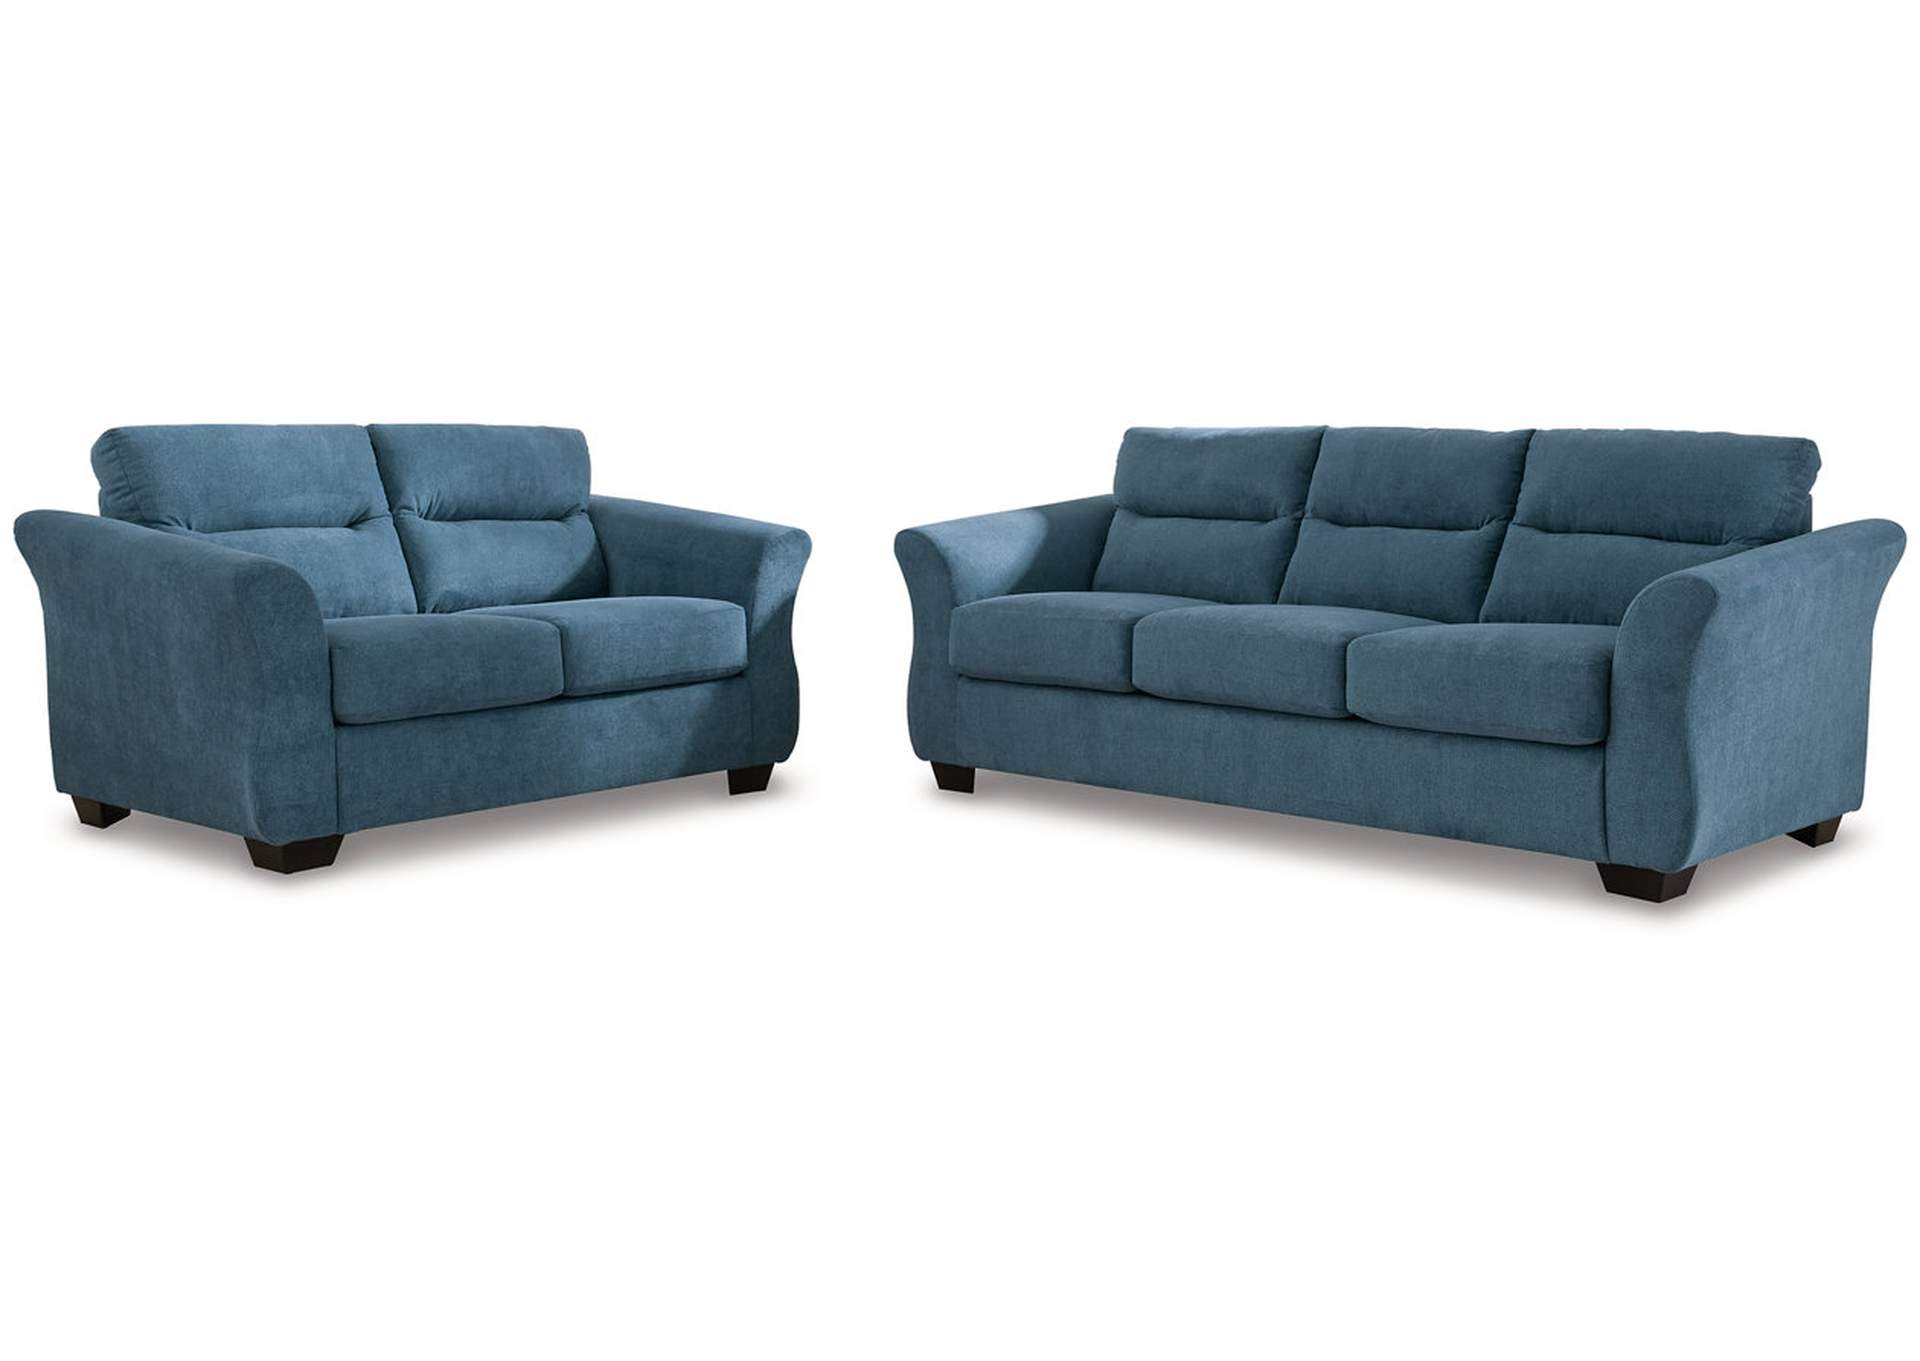 Miravel Sofa and Loveseat,Signature Design By Ashley